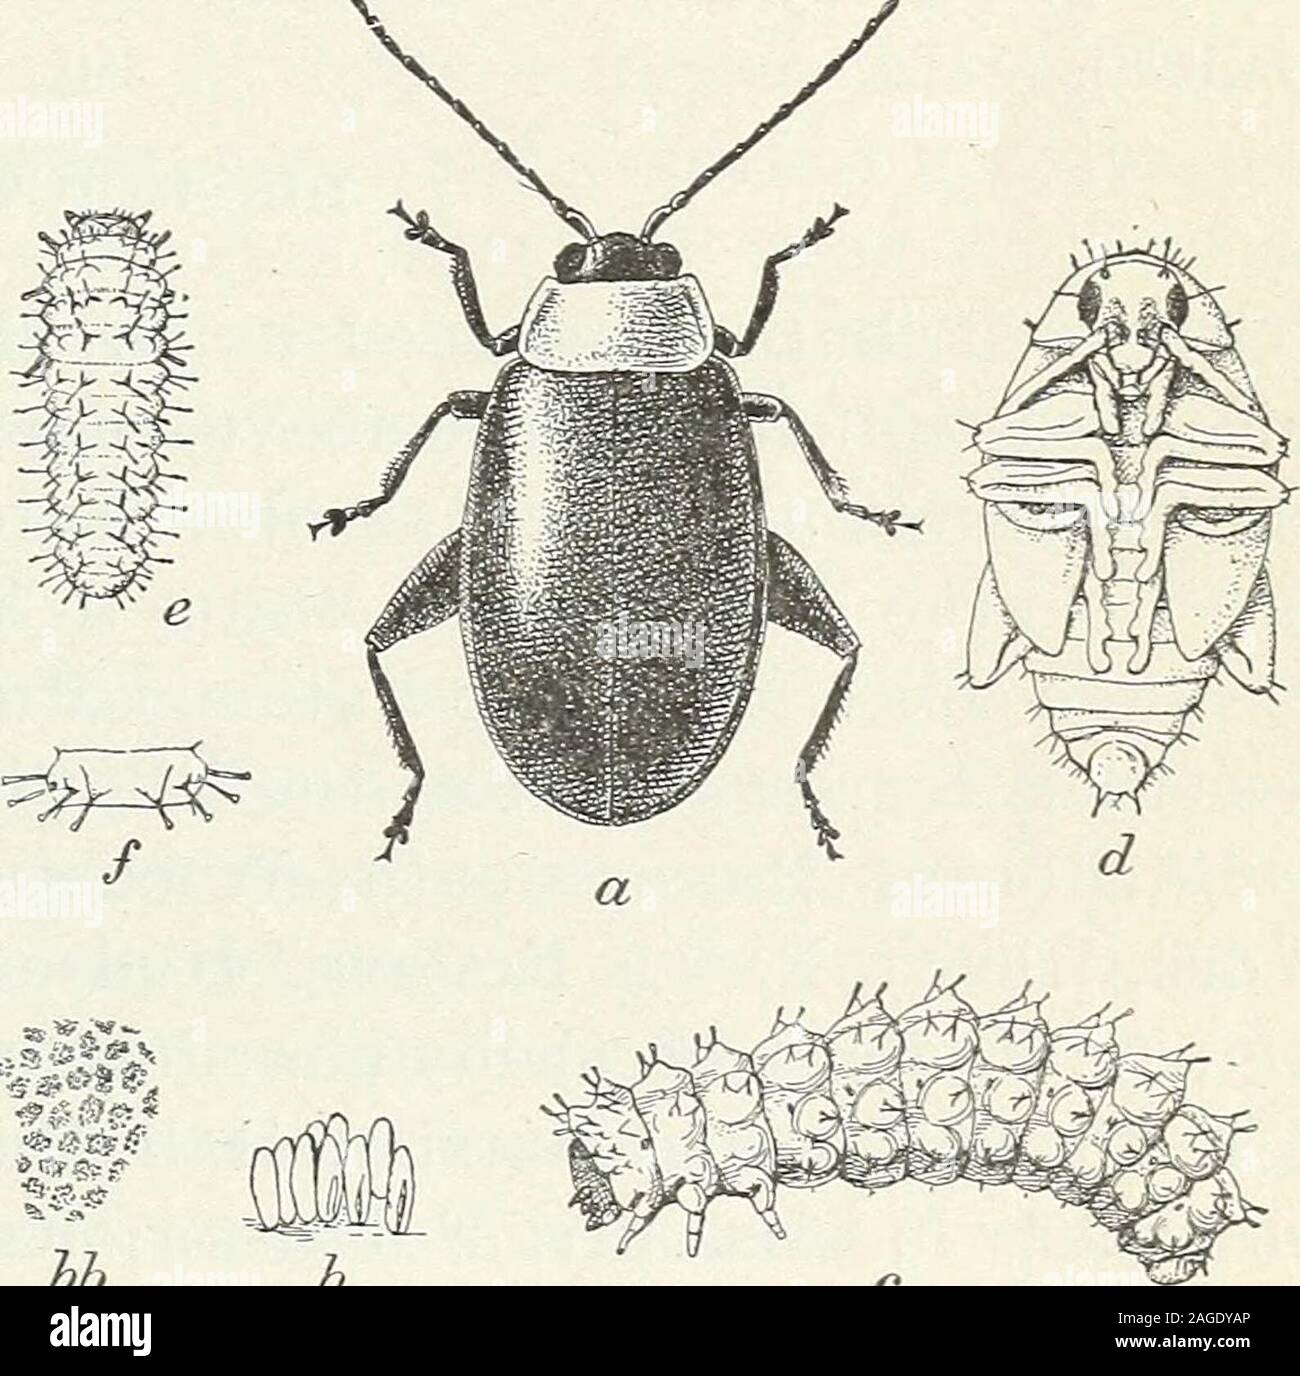 . Some insects injurious to garden and orchard crops : a series of articles dealing with insects of this class. g, althoughnaturally this order is lessregular. The larva. — When firsthatched, the larva, as may beseen by comparing the figureat e with c, looks quite unlikethe mature form. The tuber-cles which cover the body are somewhat more conspicuous, the headand legs are much larger in proportion, and the spines (see/) protrud-ing from the body are very long, measuring nearly one third that of thebody, including the tubercles. The spines are black at the base andnearly white toward their api Stock Photo